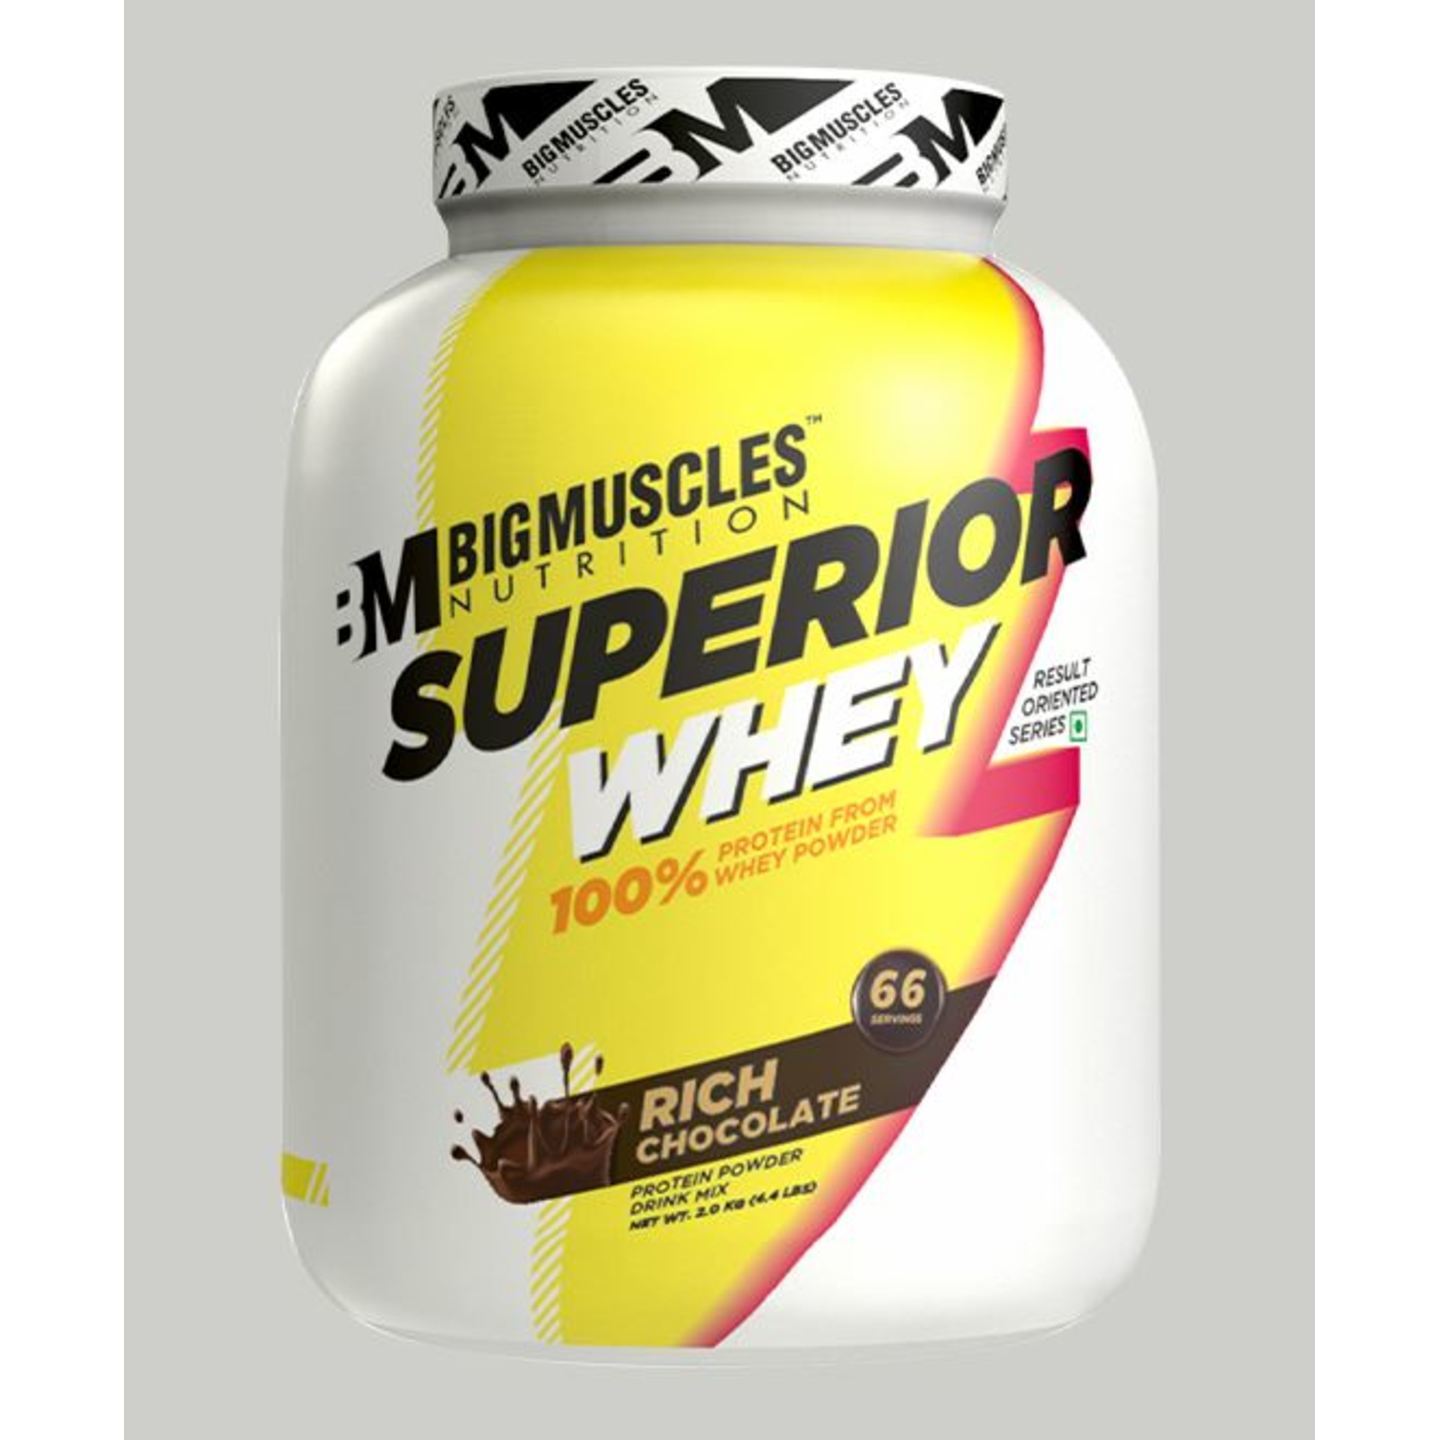 MastMart Bigmuscles Nutrition Superior Whey Protein Rich Chocolate 4.4 lbs